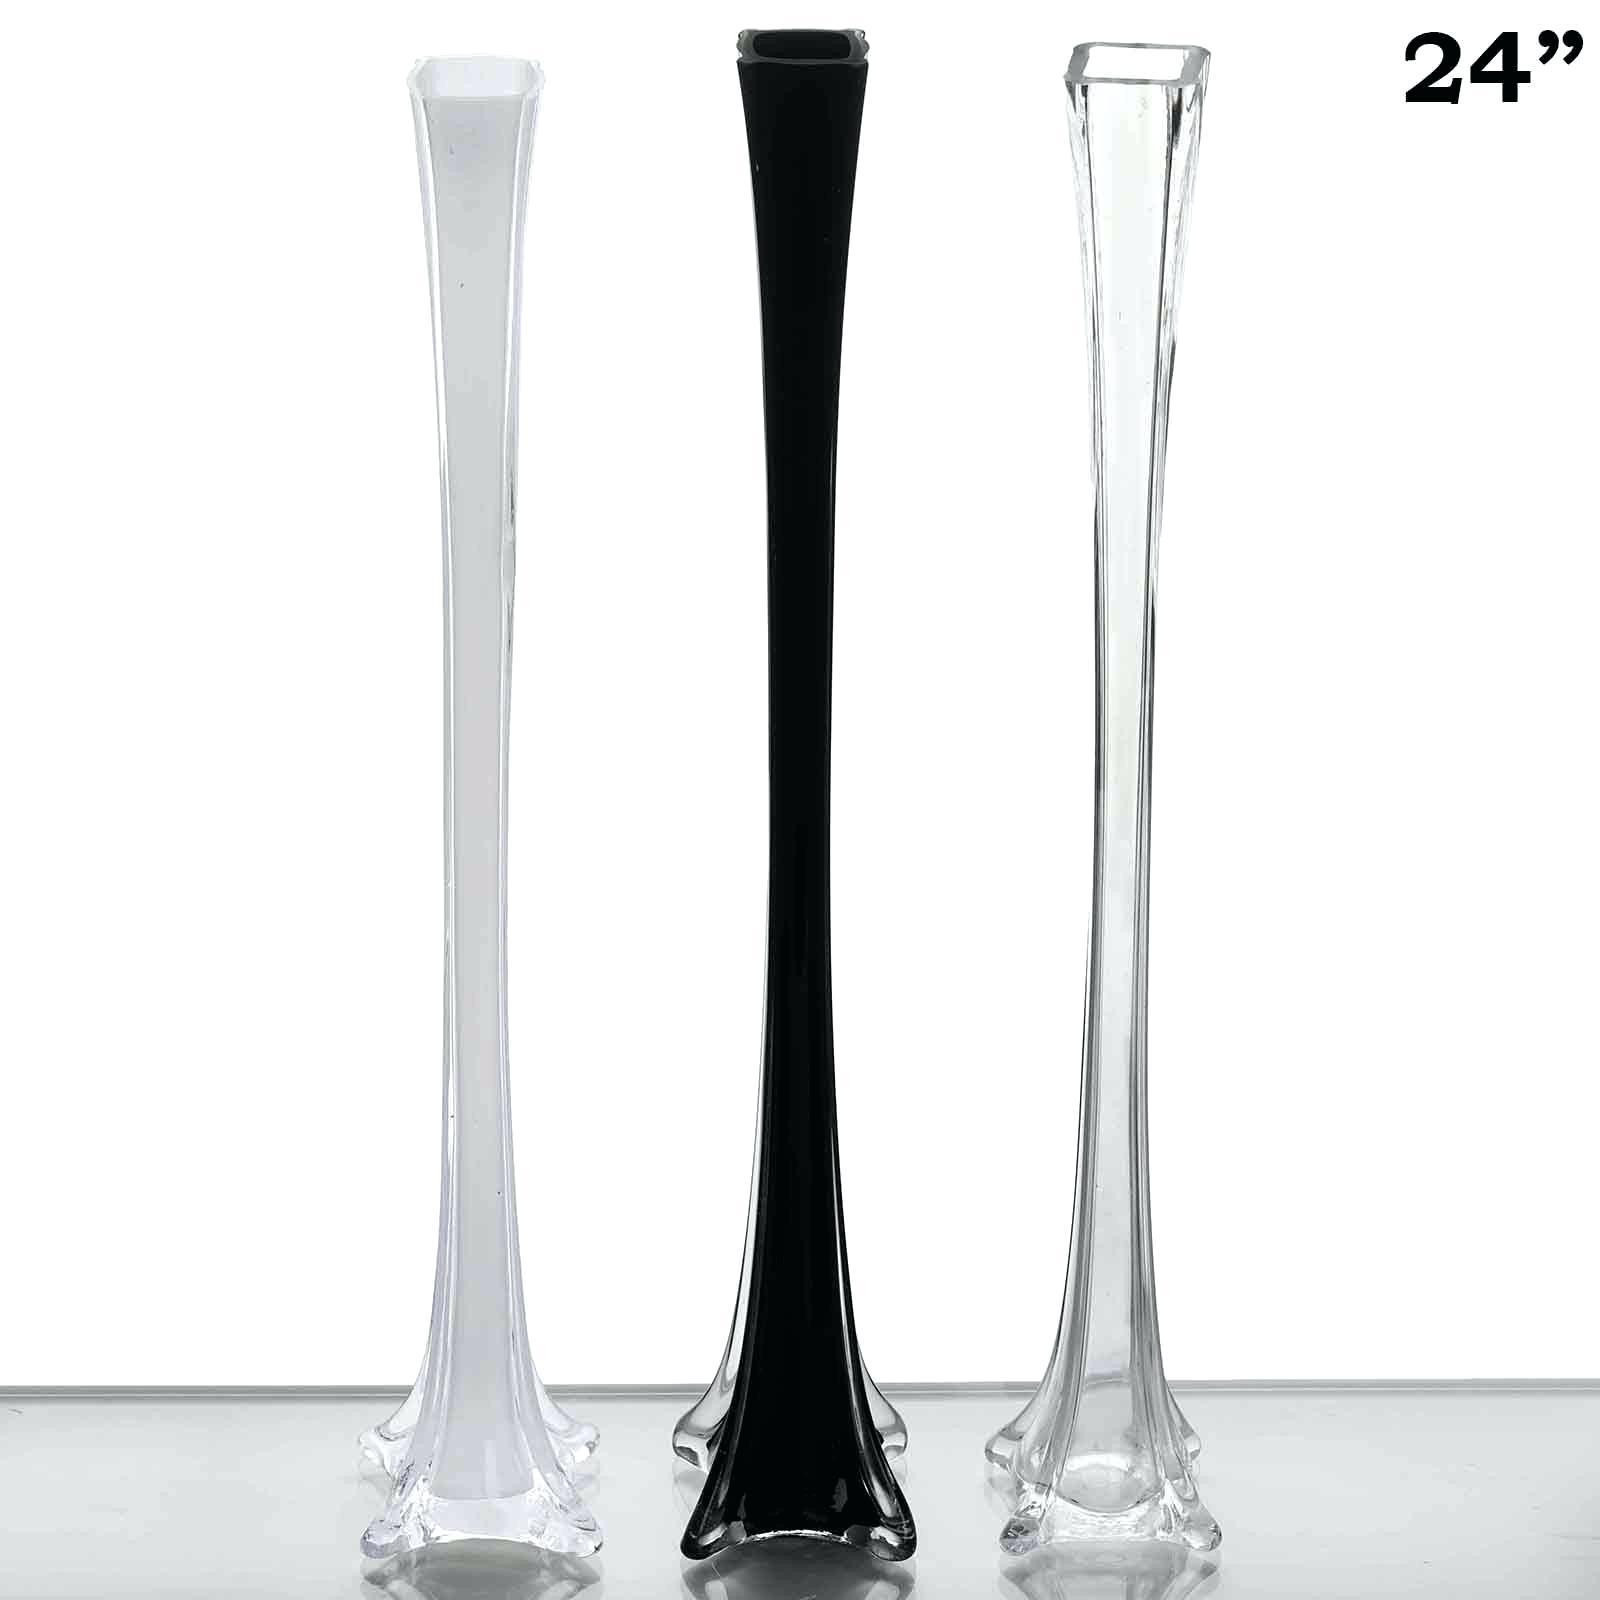 12 Great Cheap Glass Flower Vases wholesale 2022 free download cheap glass flower vases wholesale of fantastic chair decor ideas from living room vases wholesale awesome regarding fantastic chair decor ideas from living room vases wholesale awesome chea